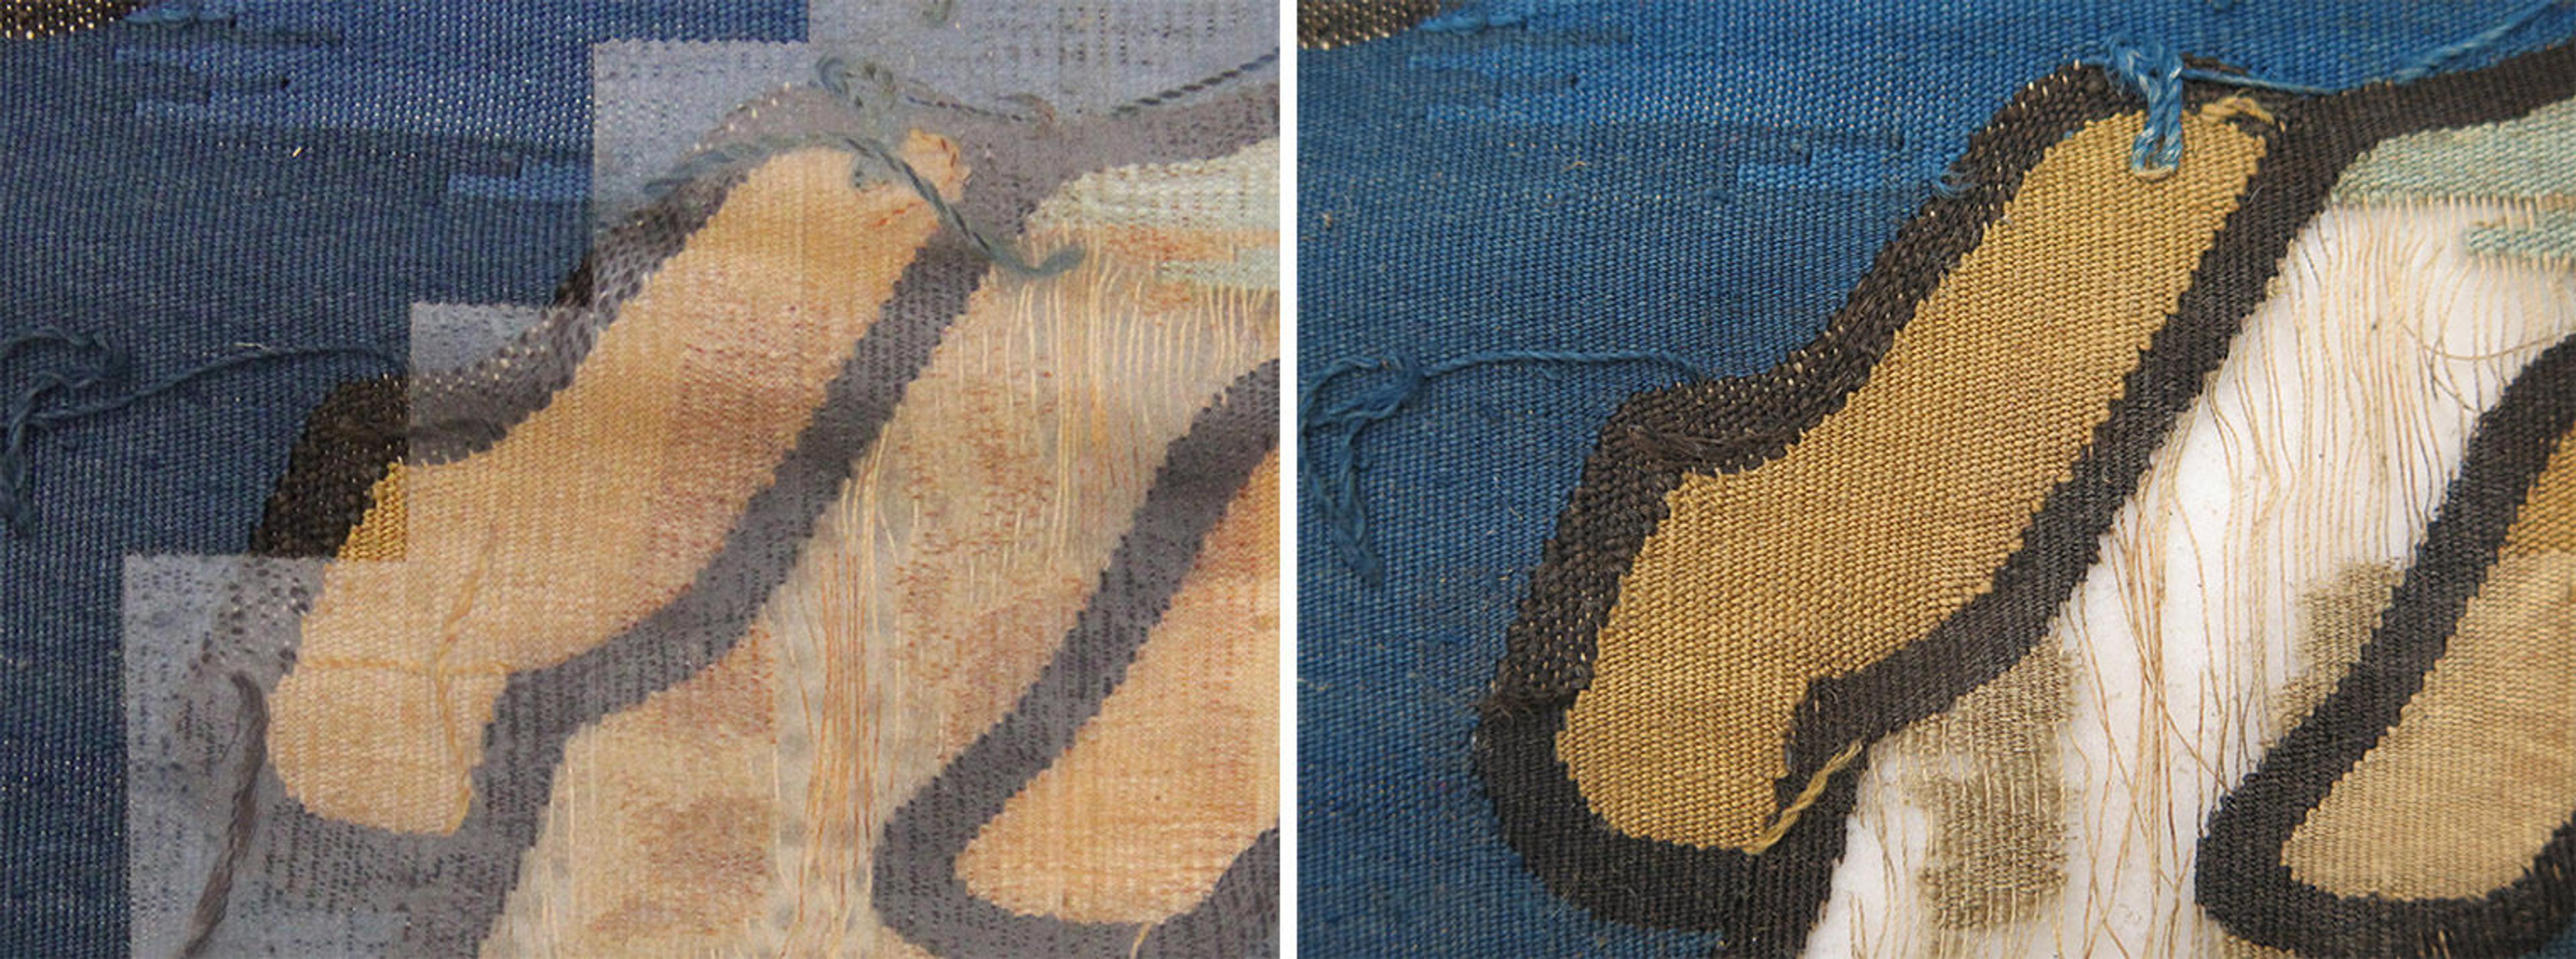 Two close-ups showing before and after sticky tape removal